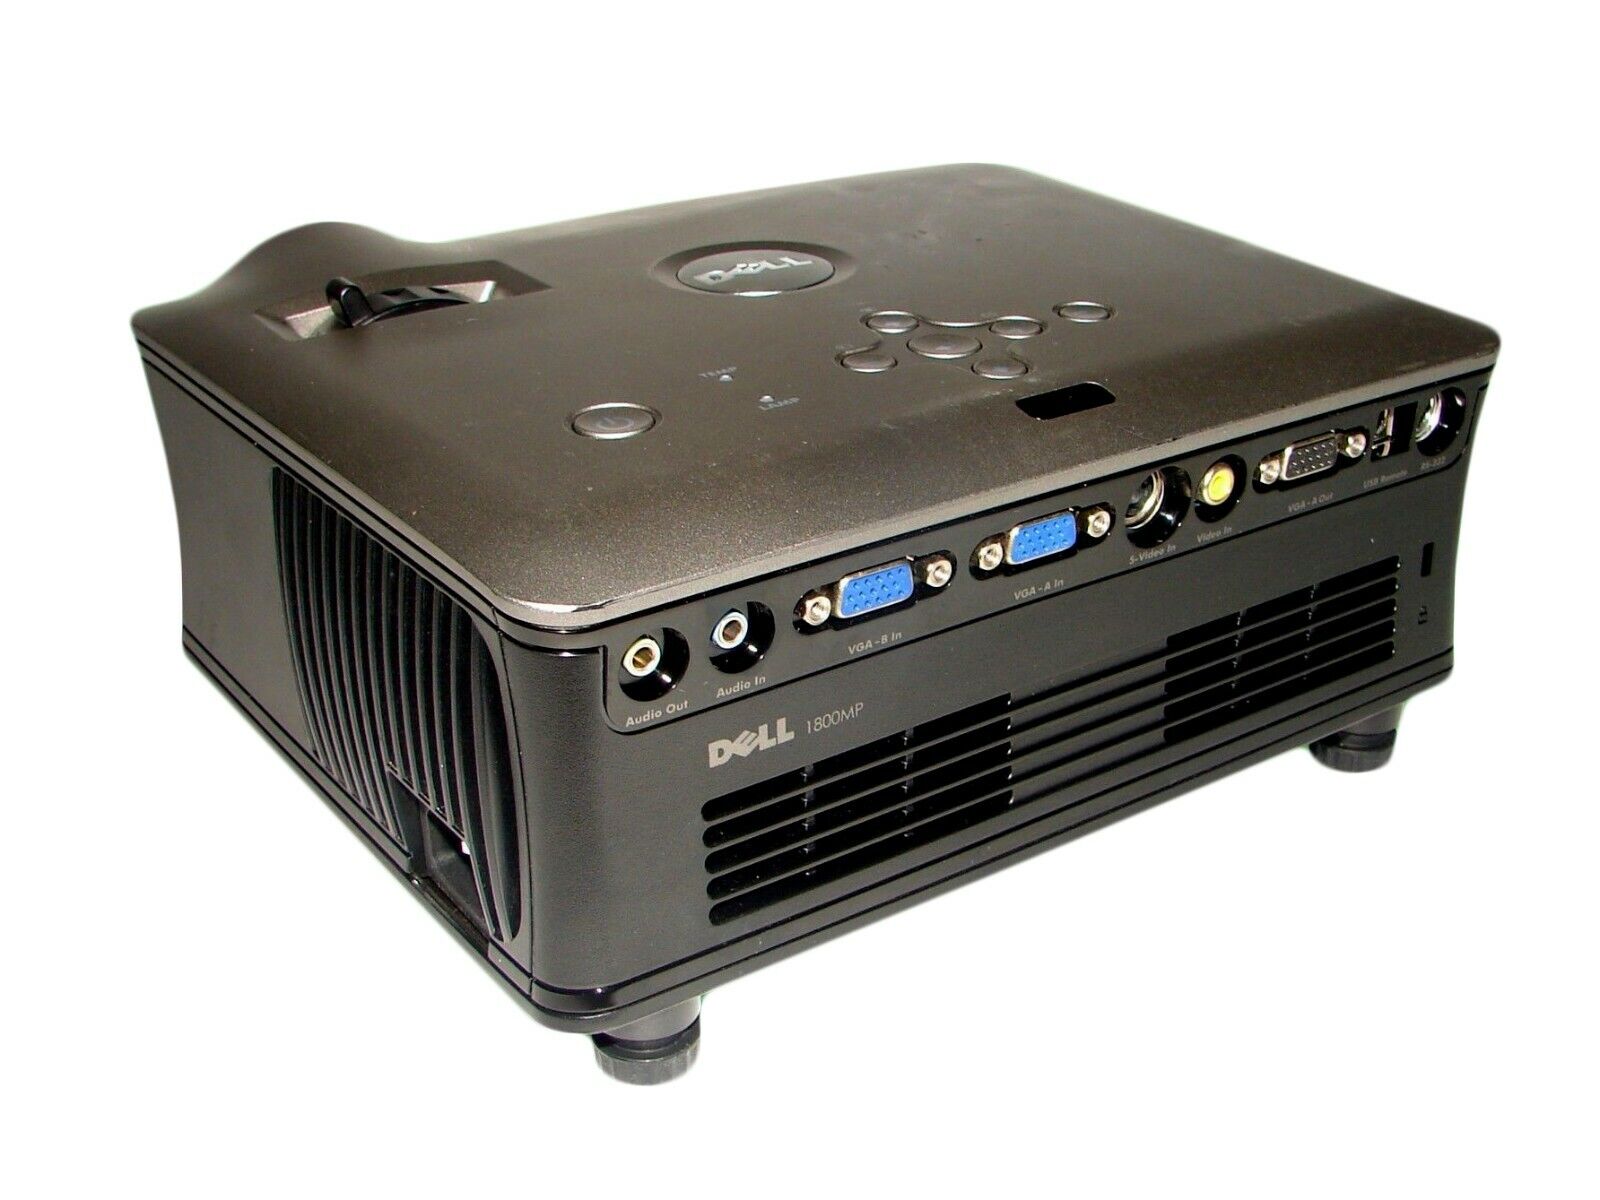 1800MP Projector